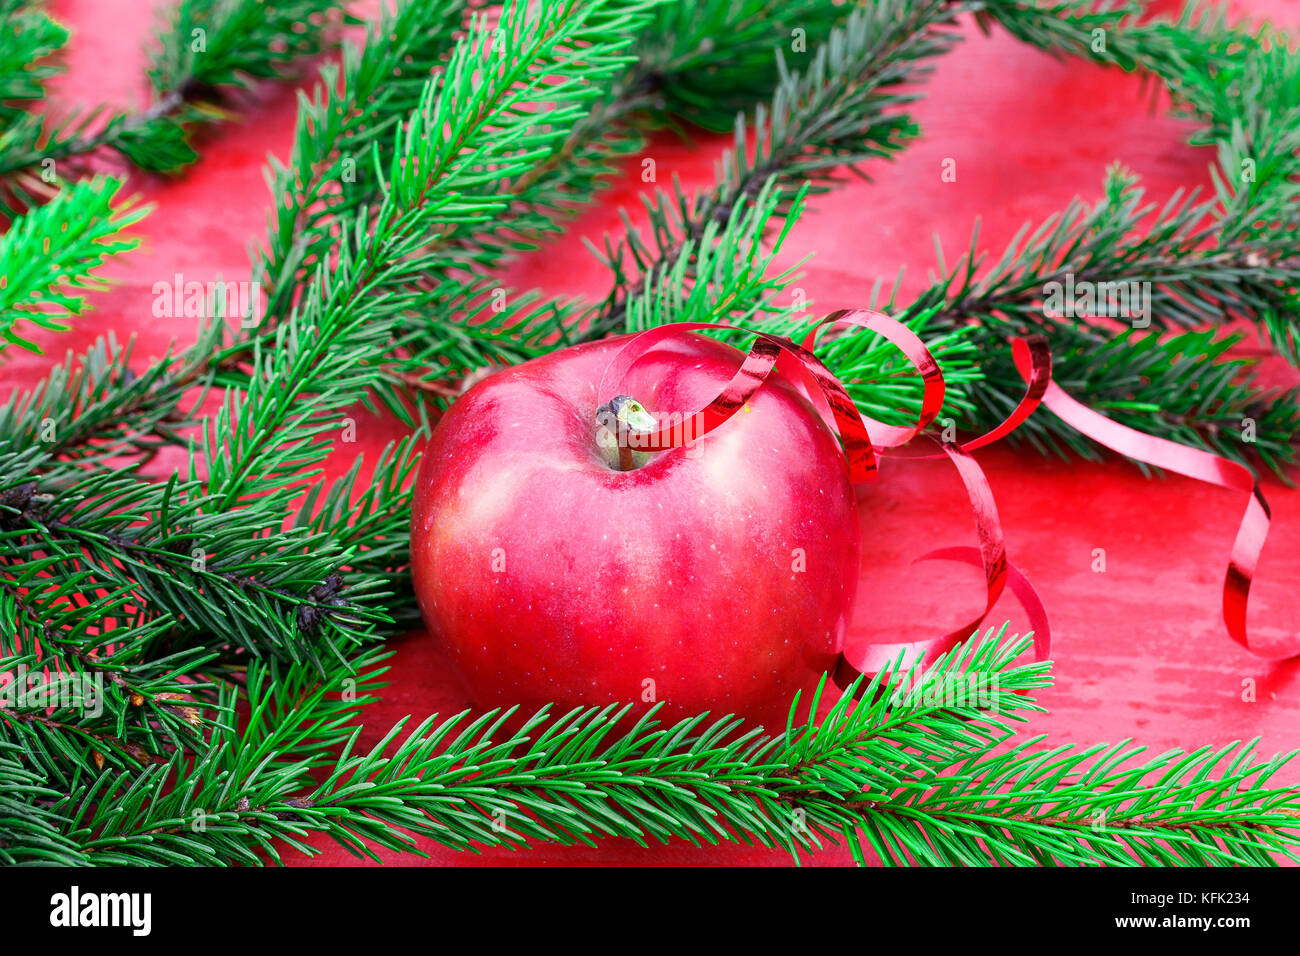 Christmas background of ripe red Apple on the table among the green fir branches Stock Photo